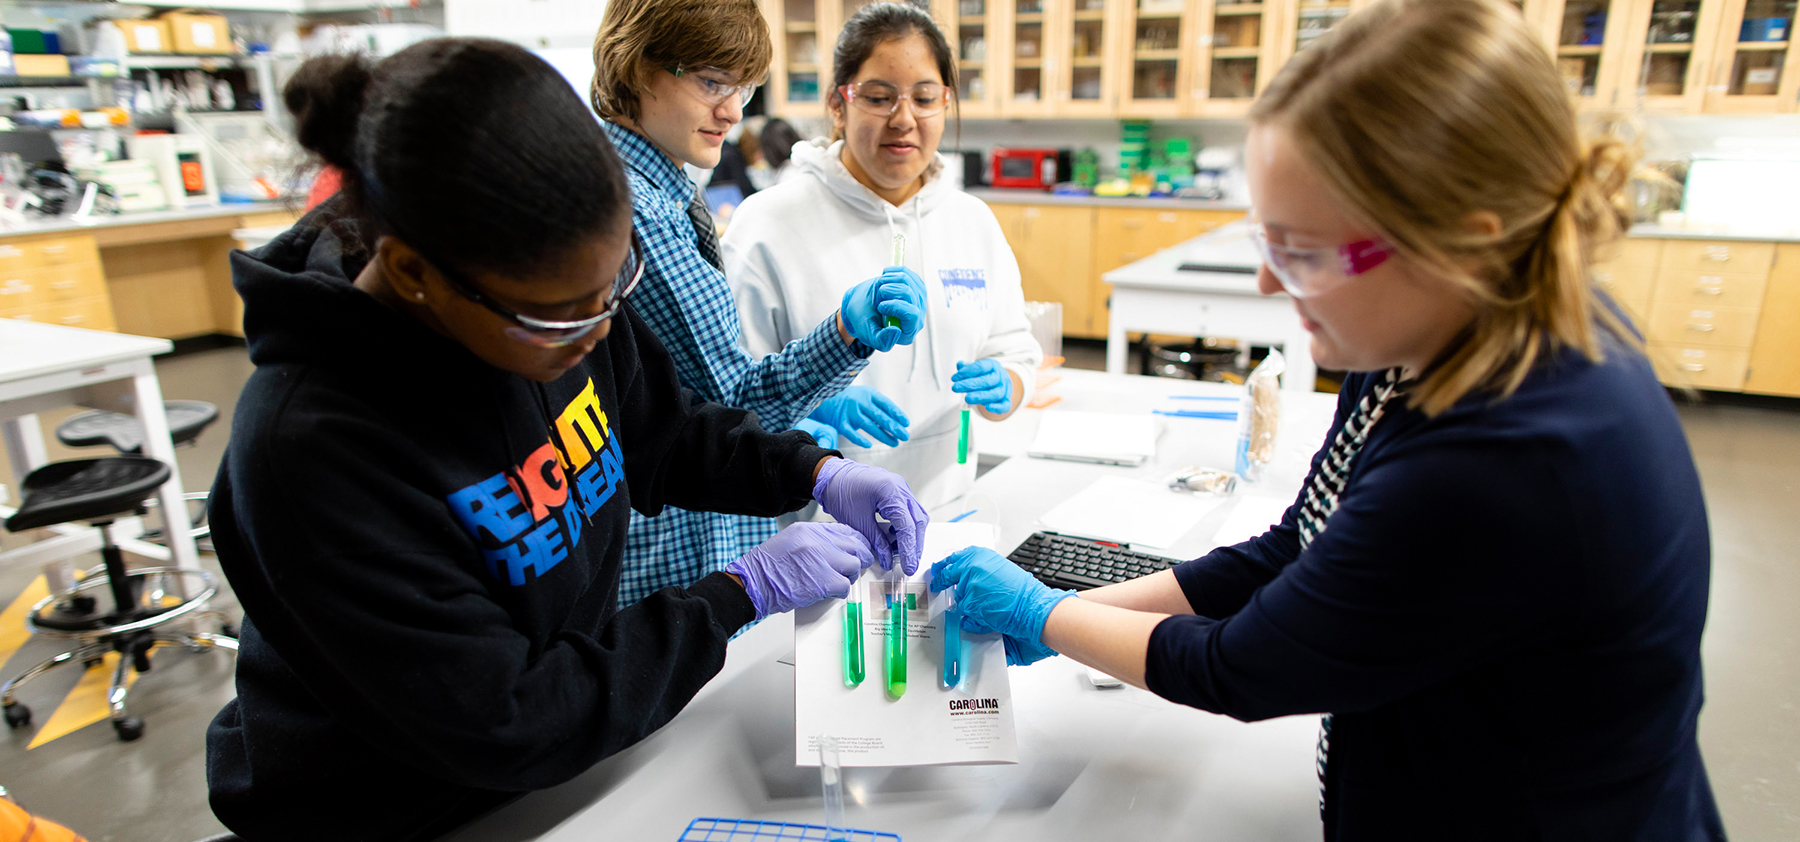 Students compare test tubes in the Bellevue lab at Quest Forward Academy Omaha.